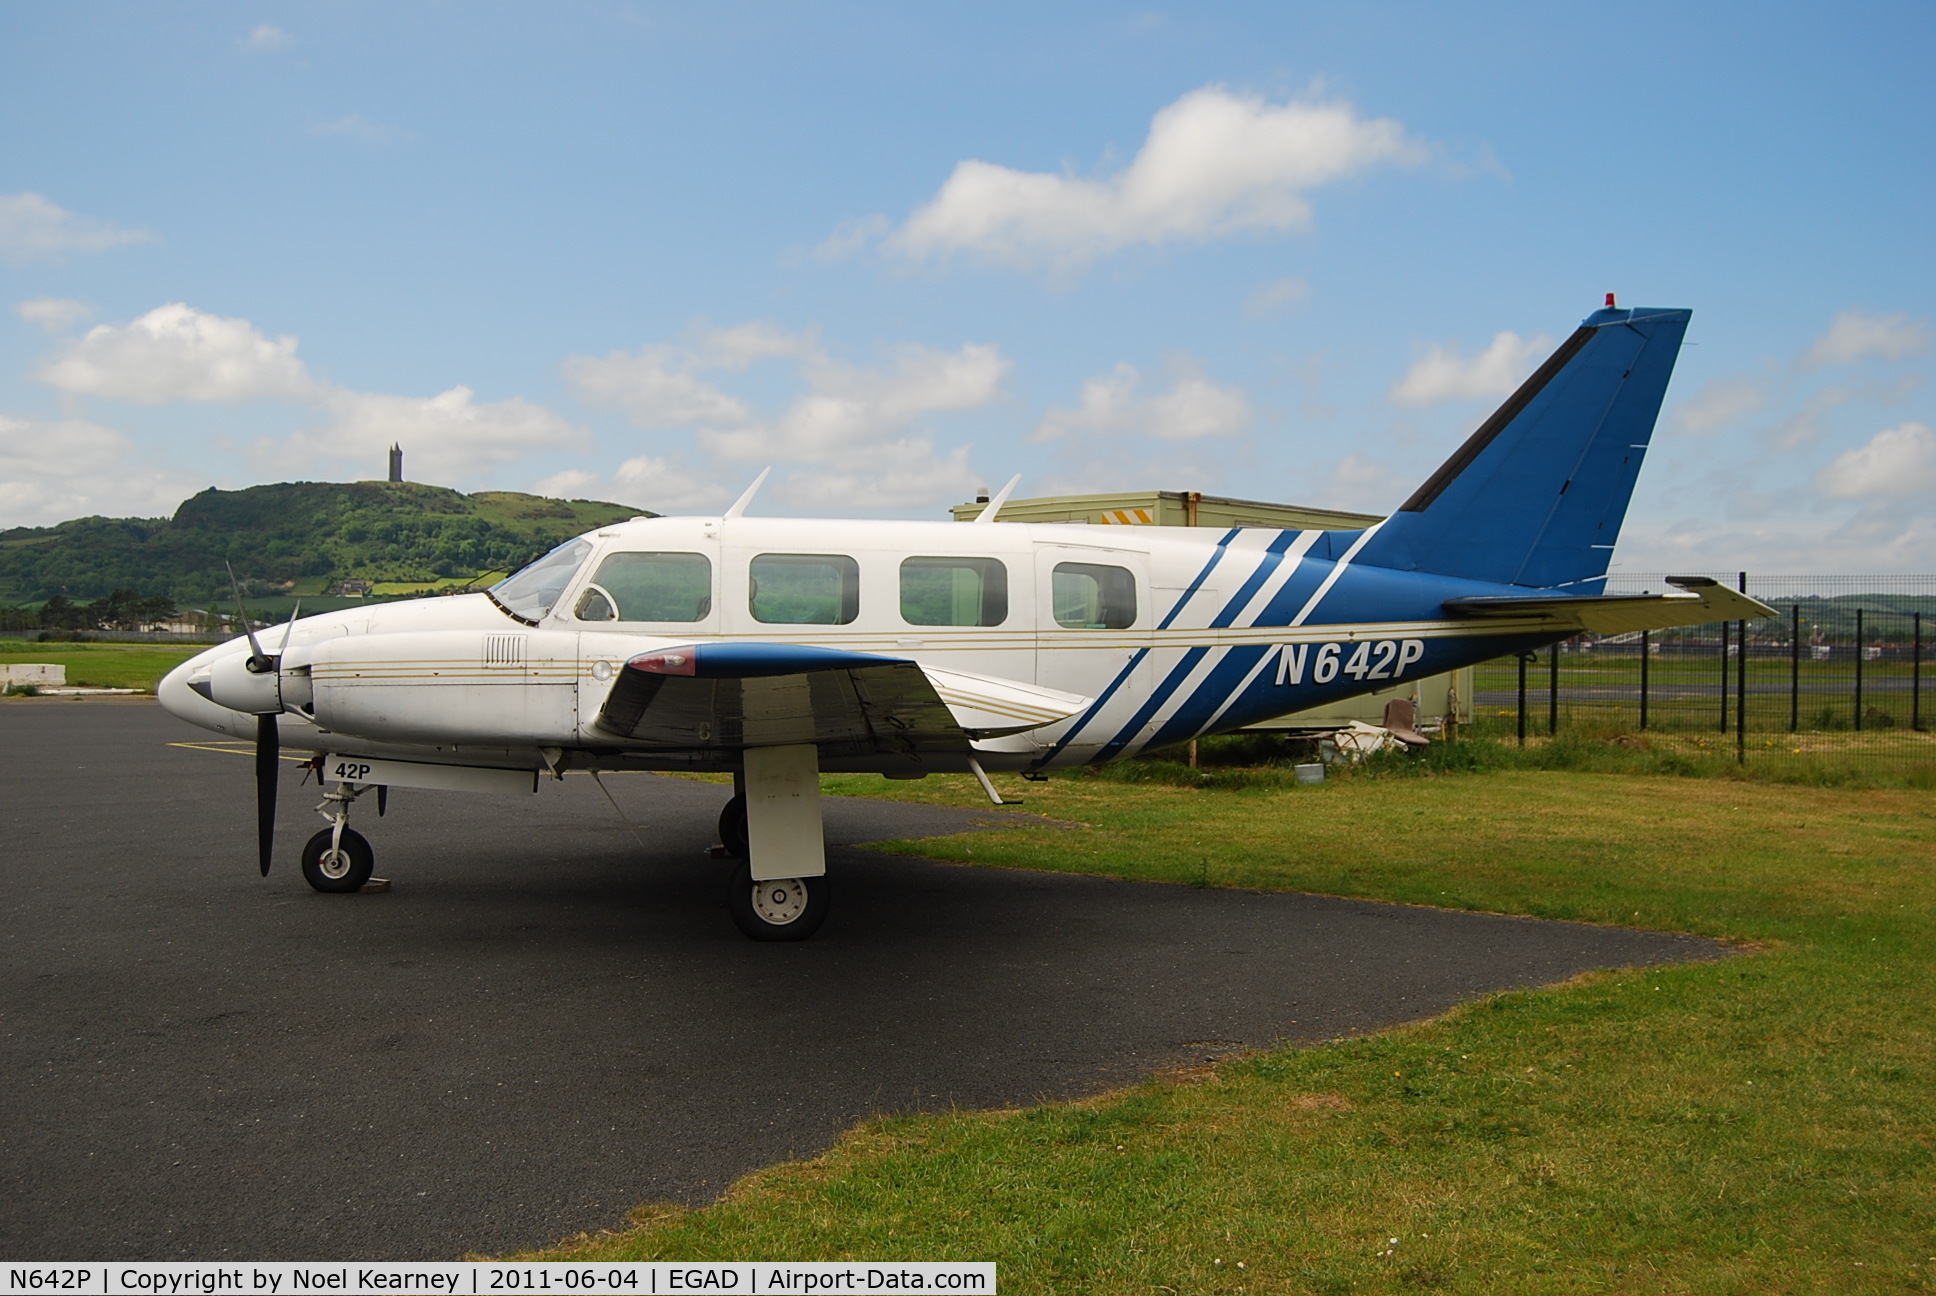 N642P, 1971 Piper PA-31-310 Navajo Navajo C/N 31-761, Parked on the apron at Newtownards Airfield.